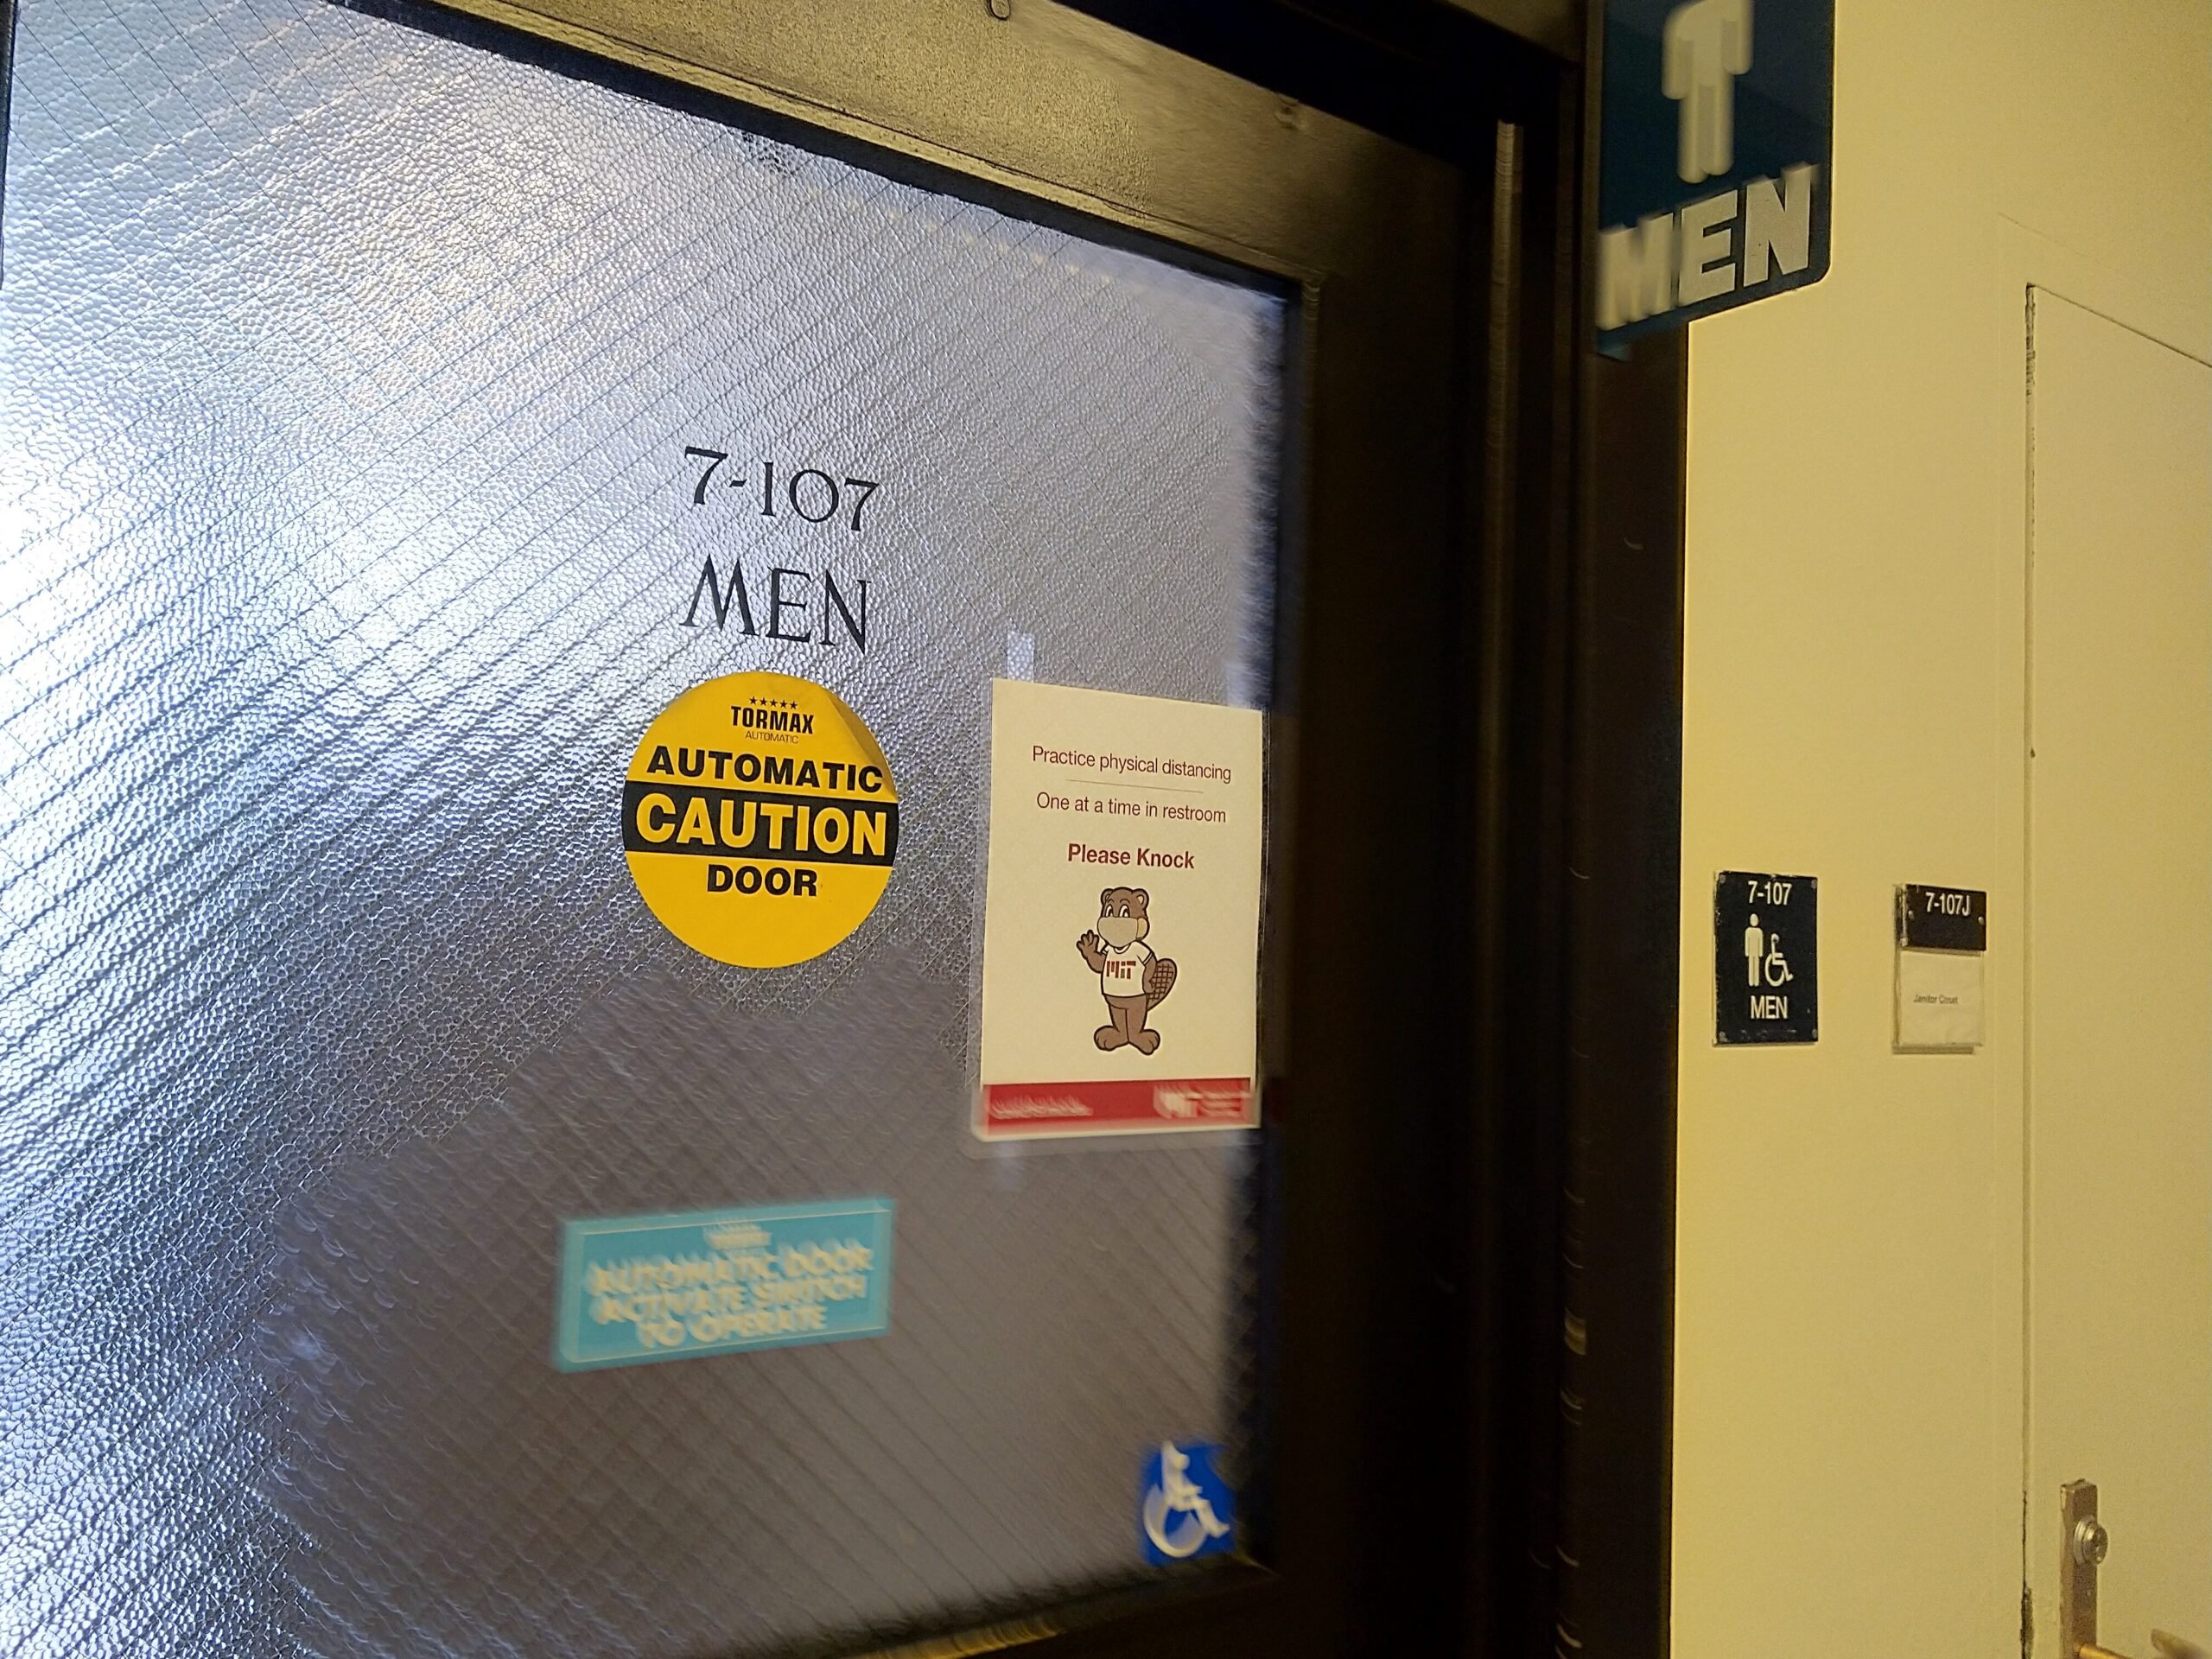 a bathroom, 7-107, with a sign saying "Practice physical distancing", "One person at a time in the restroom", "Please Knock"